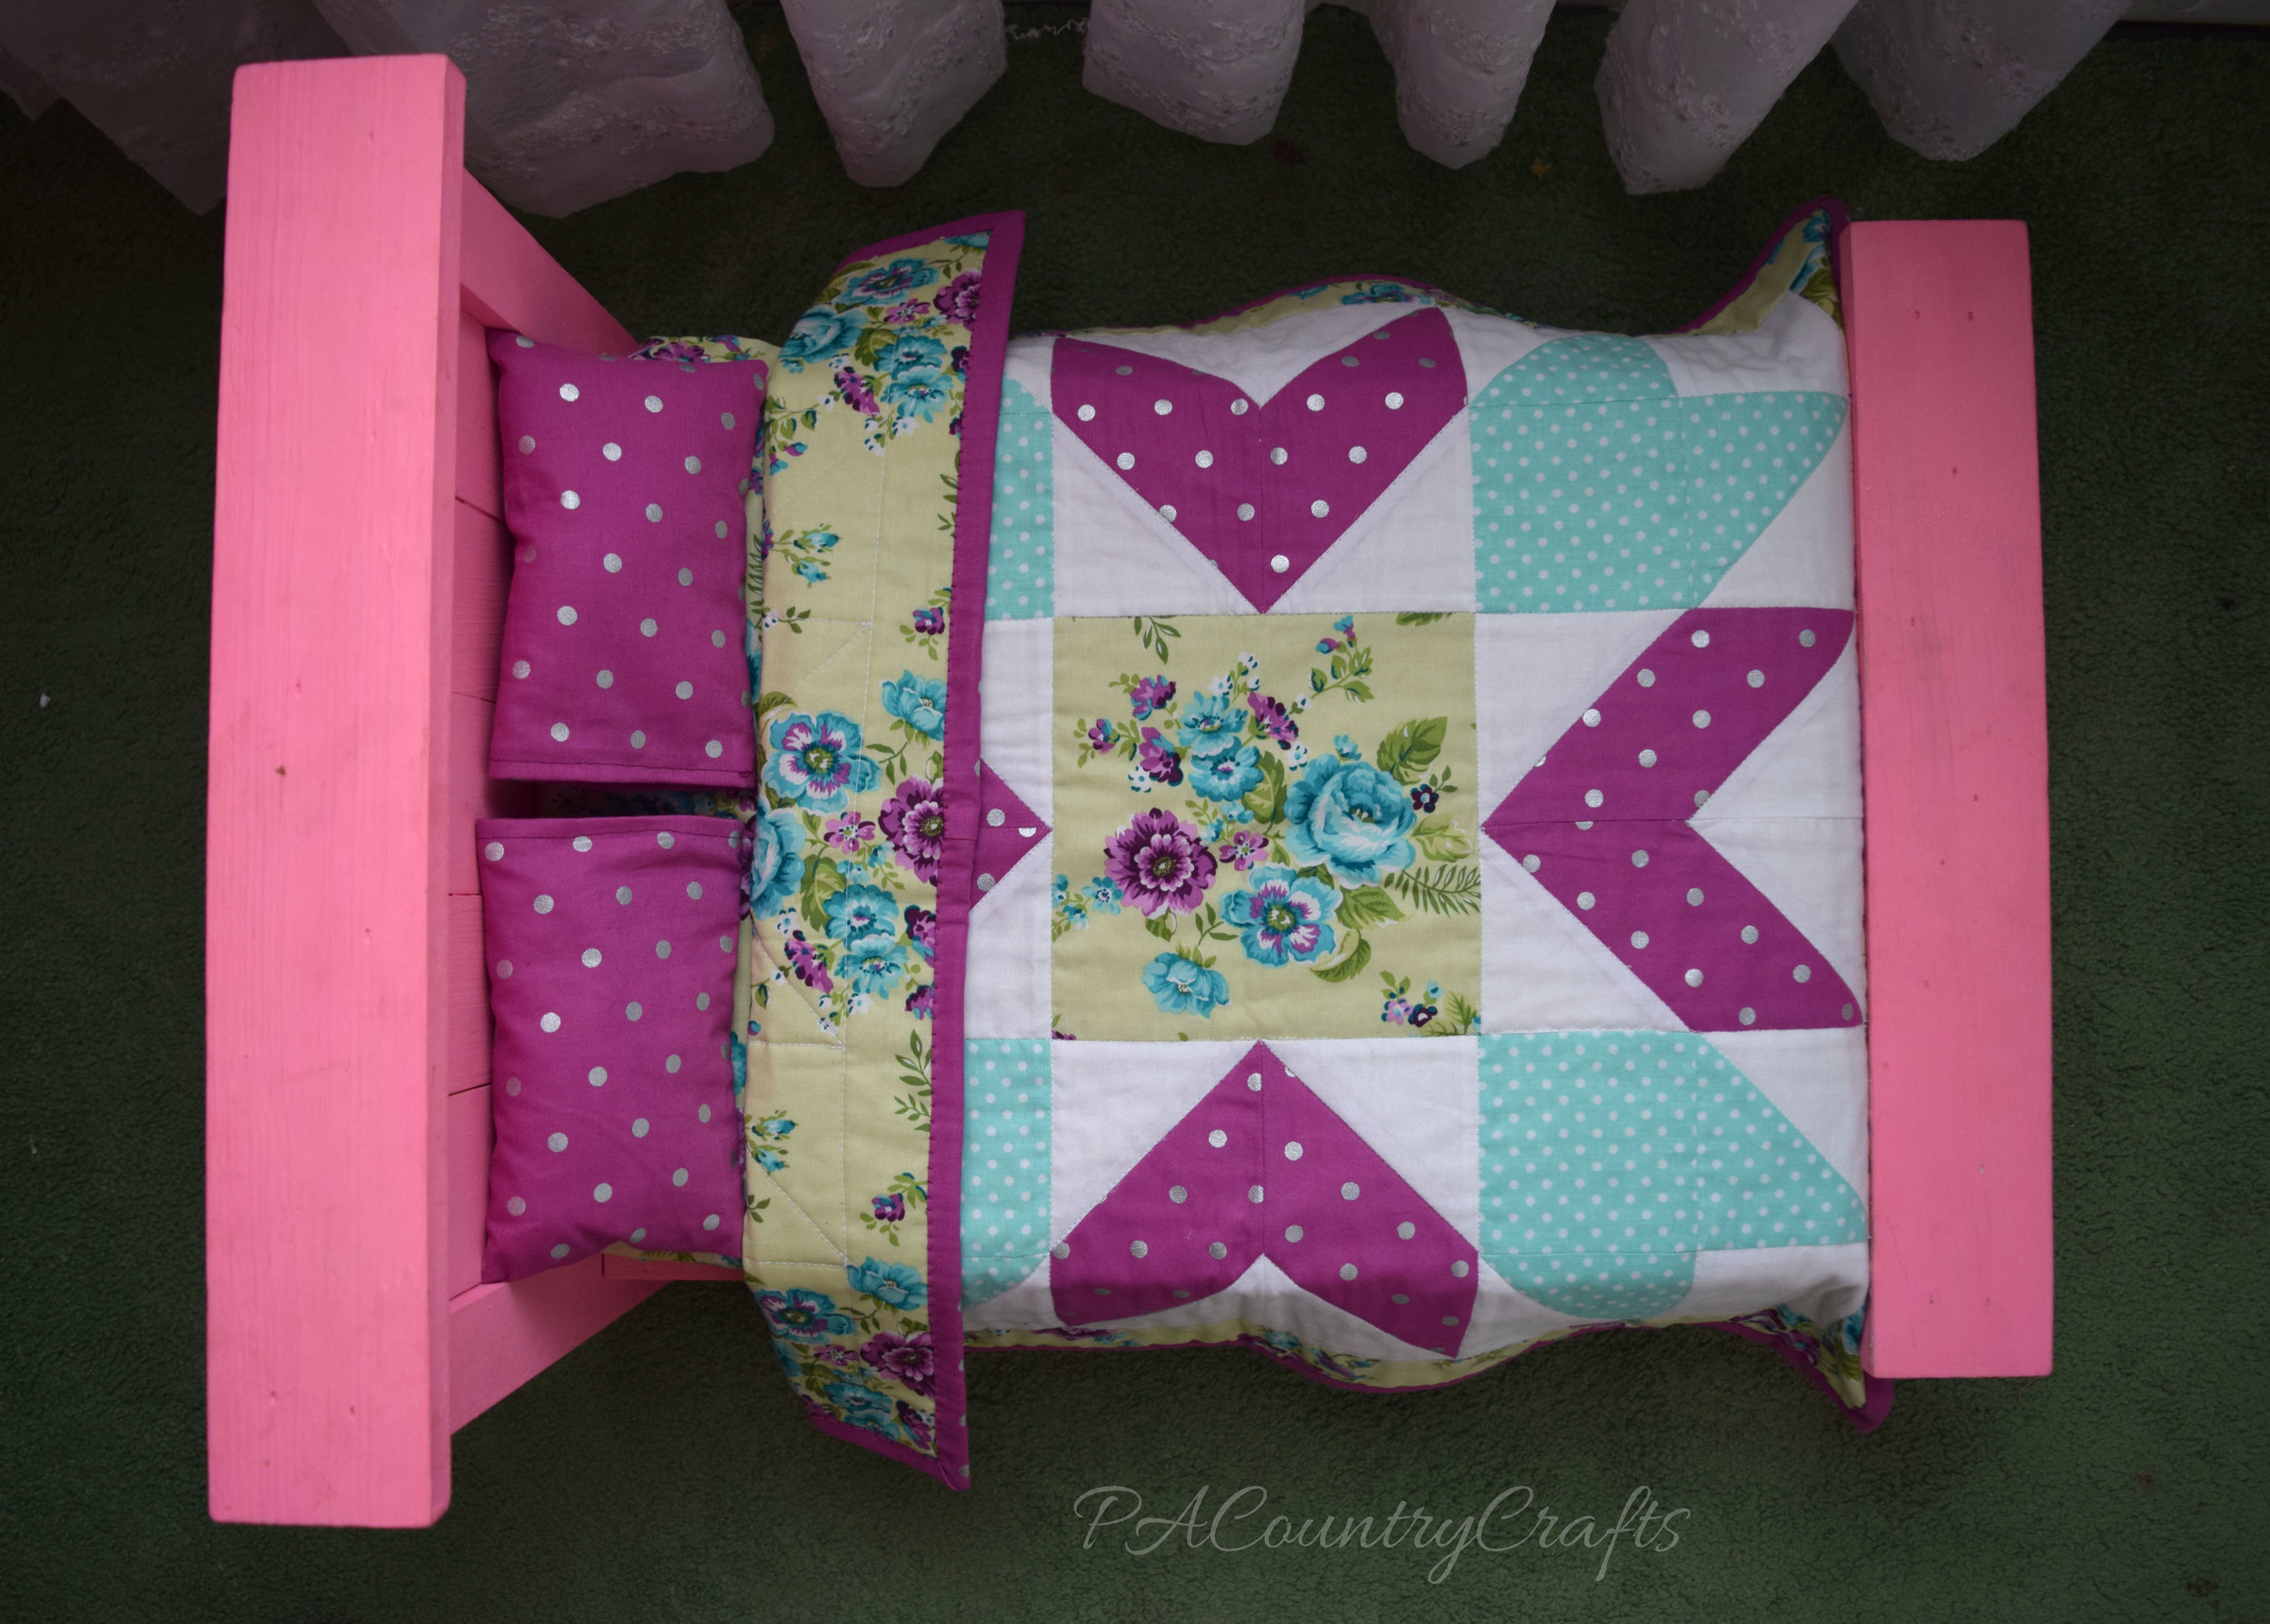 American Girl Pink Farmhouse Doll Bed with Star Quilt and Pillows